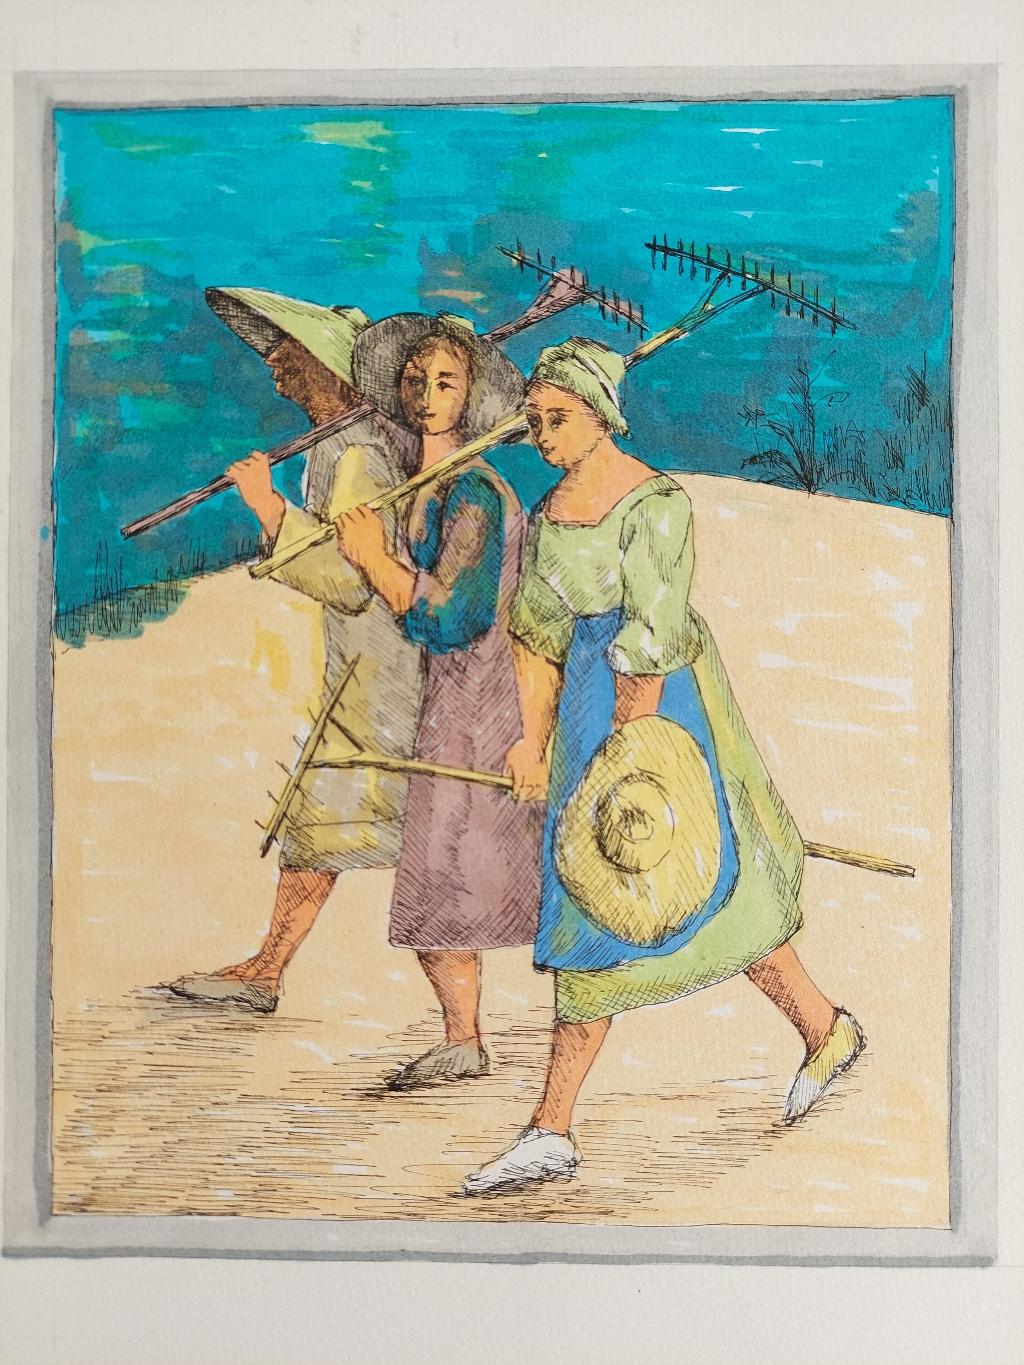 20th Century French Modernist Painting, Farmworkers In Good Condition For Sale In Cirencester, GB